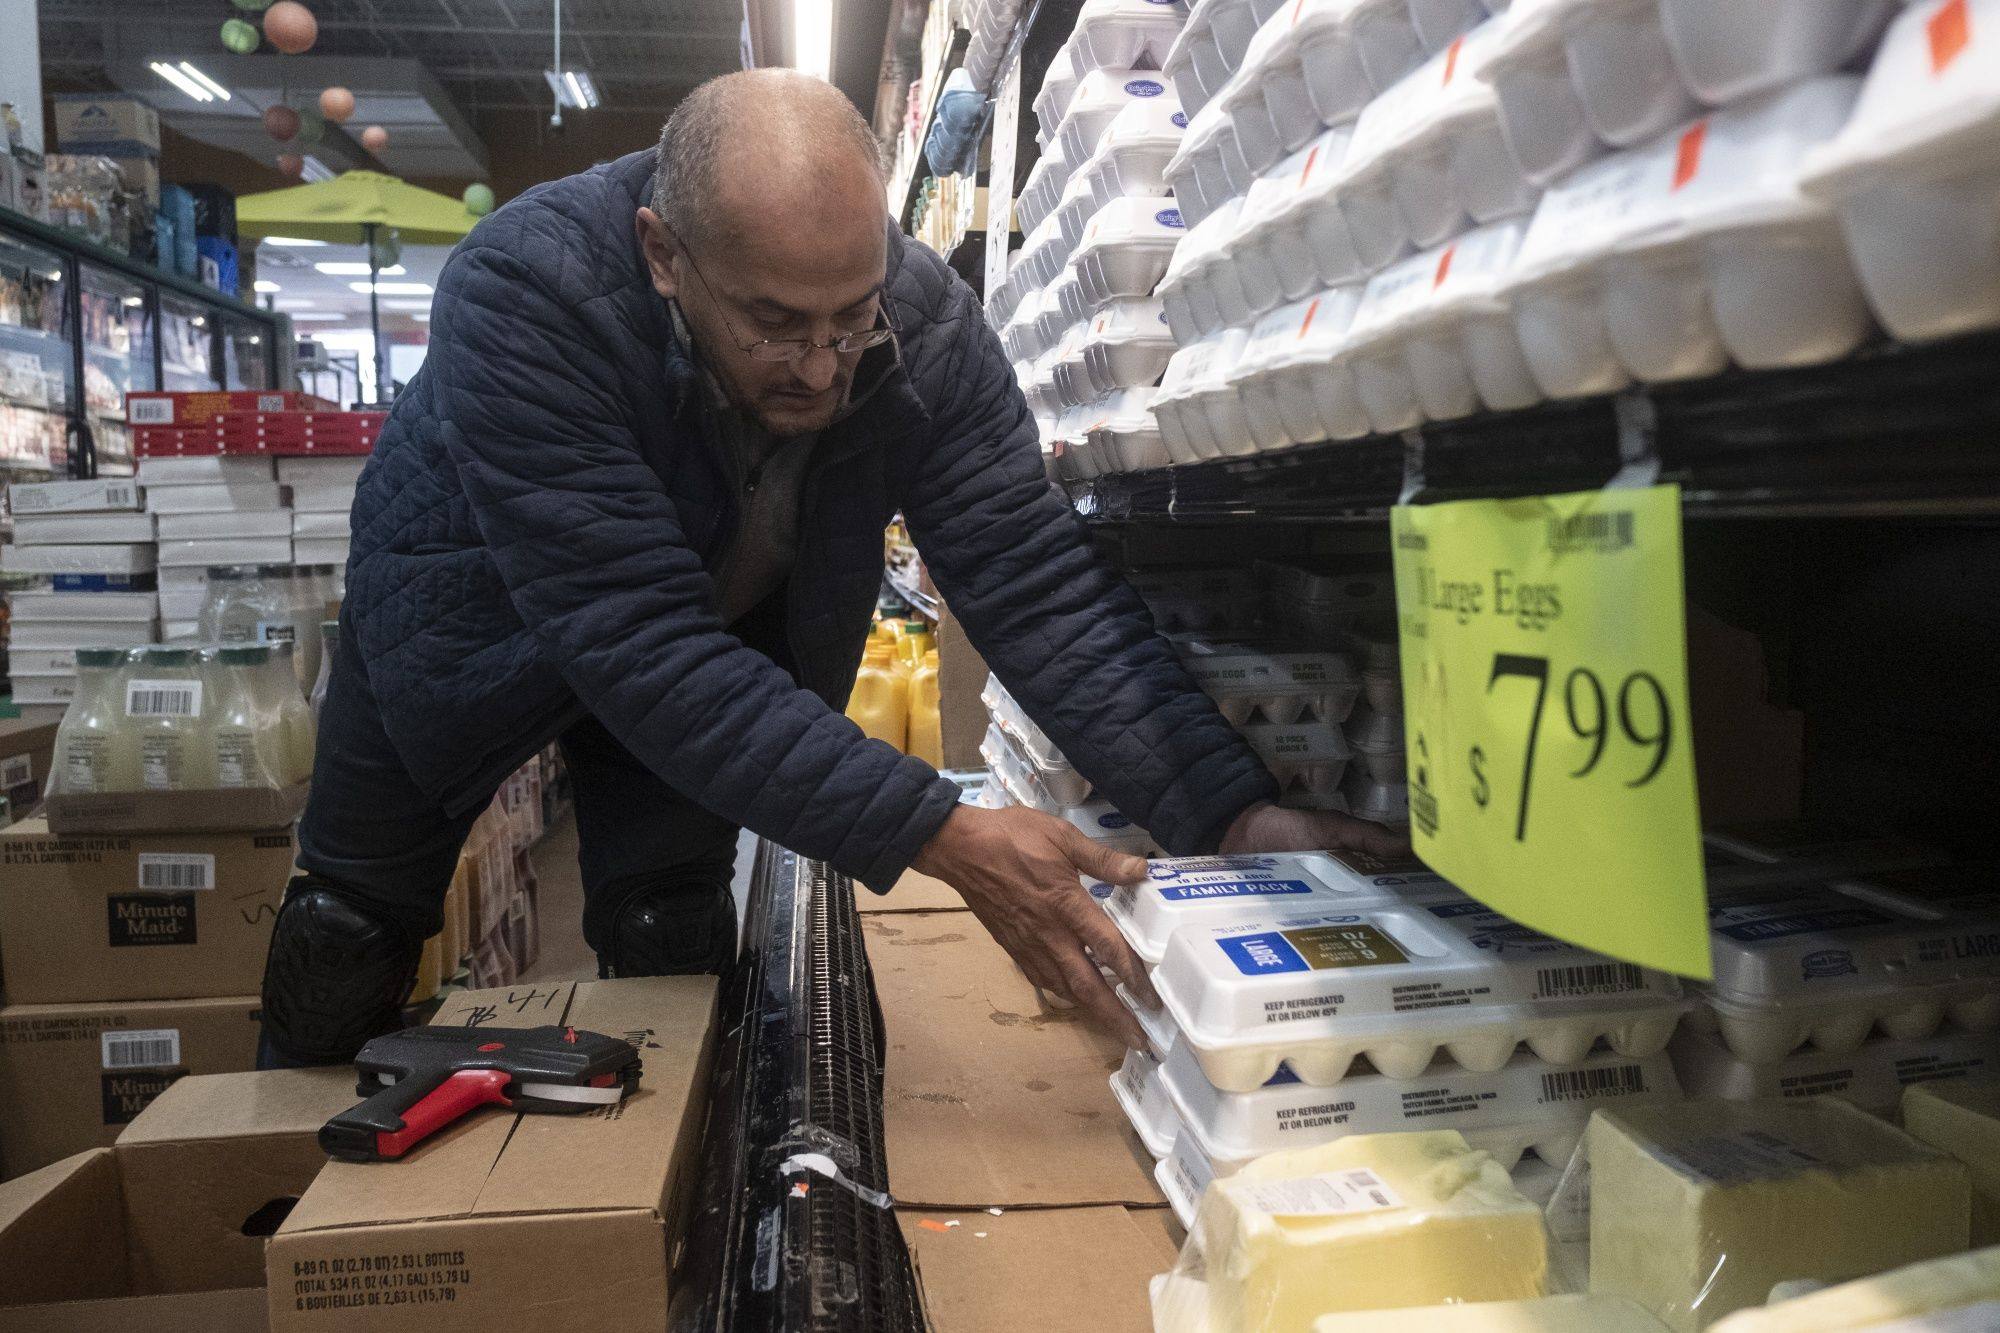 A worker stocks eggs on a shelf at a grocery store in Detroit, Michigan, on January 18. While egg prices remain stubbornly high, other price rises are easing, a sign that inflation may have peaked. Photo: Bloomberg